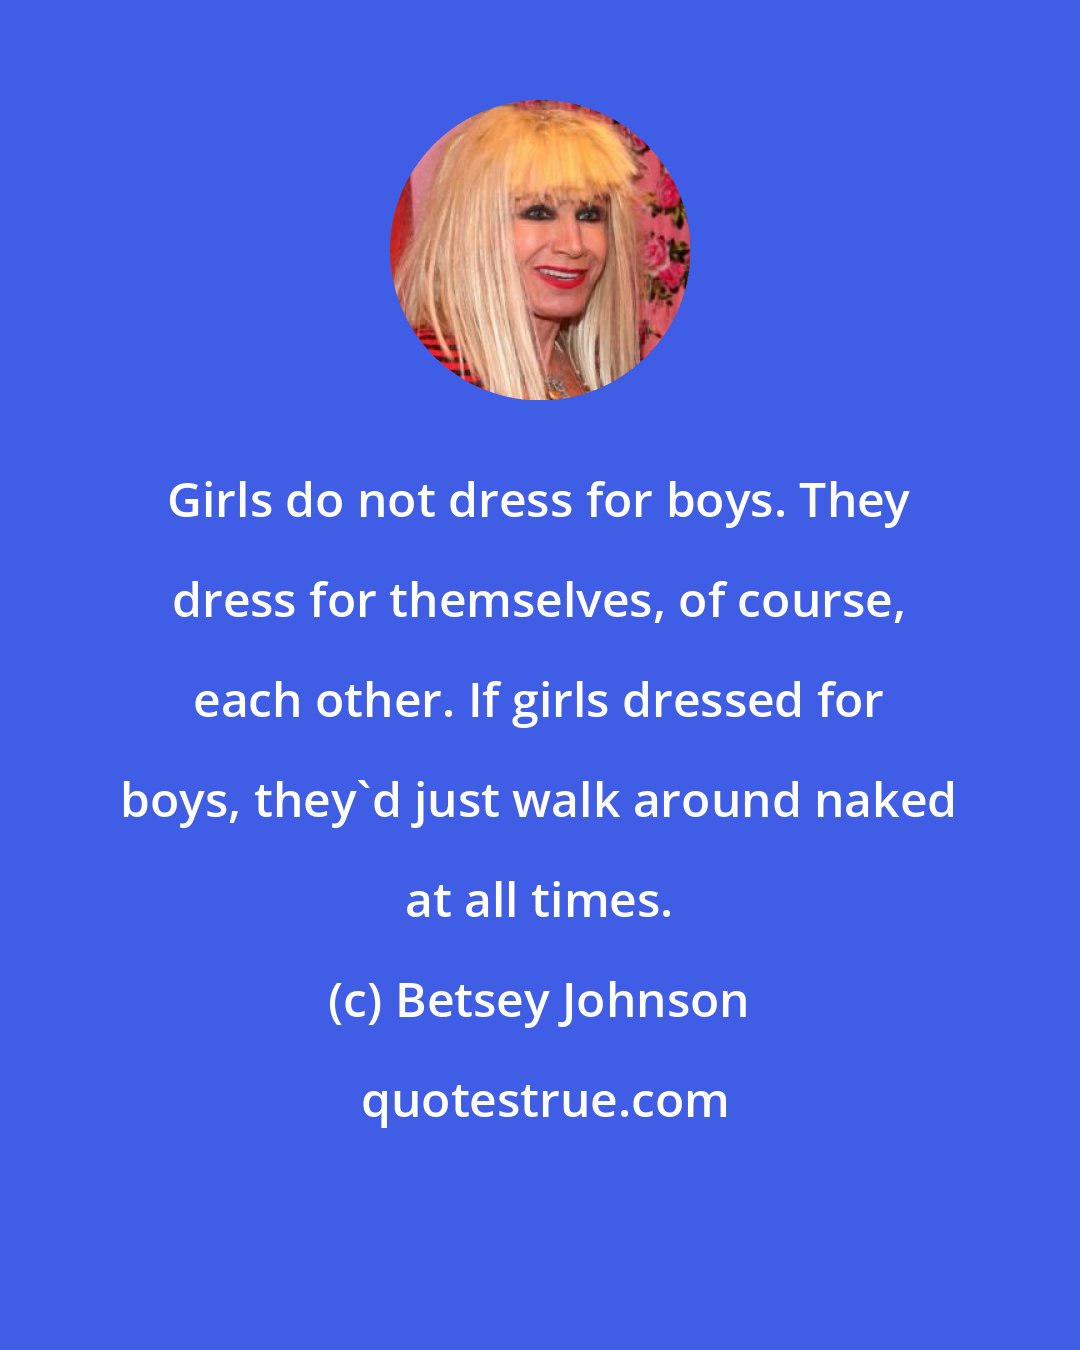 Betsey Johnson: Girls do not dress for boys. They dress for themselves, of course, each other. If girls dressed for boys, they'd just walk around naked at all times.